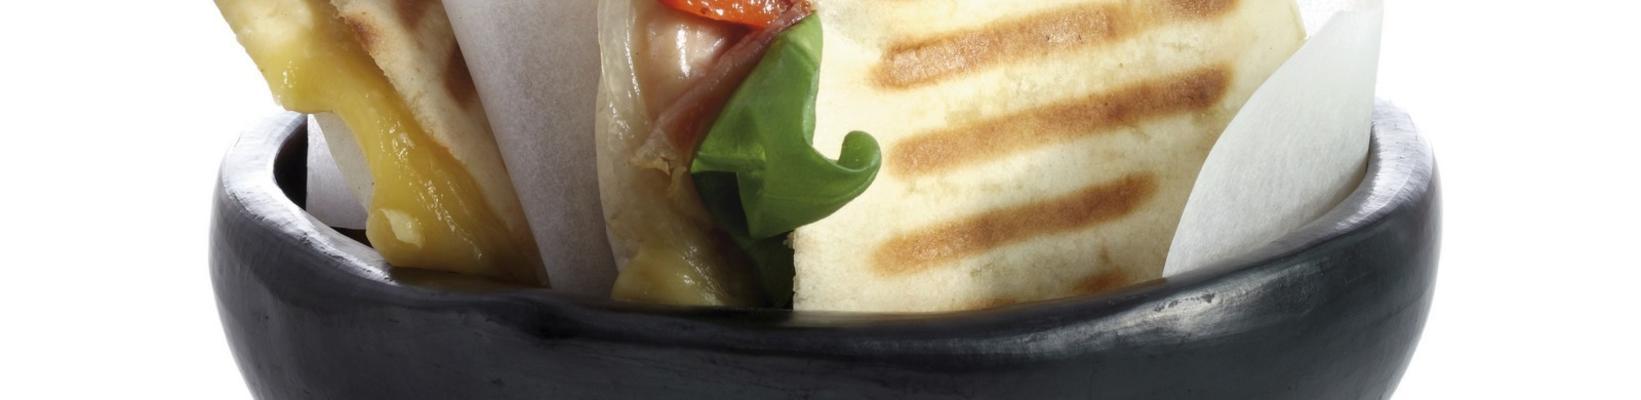 pita tosti with cheese, parma ham and roasted peppers